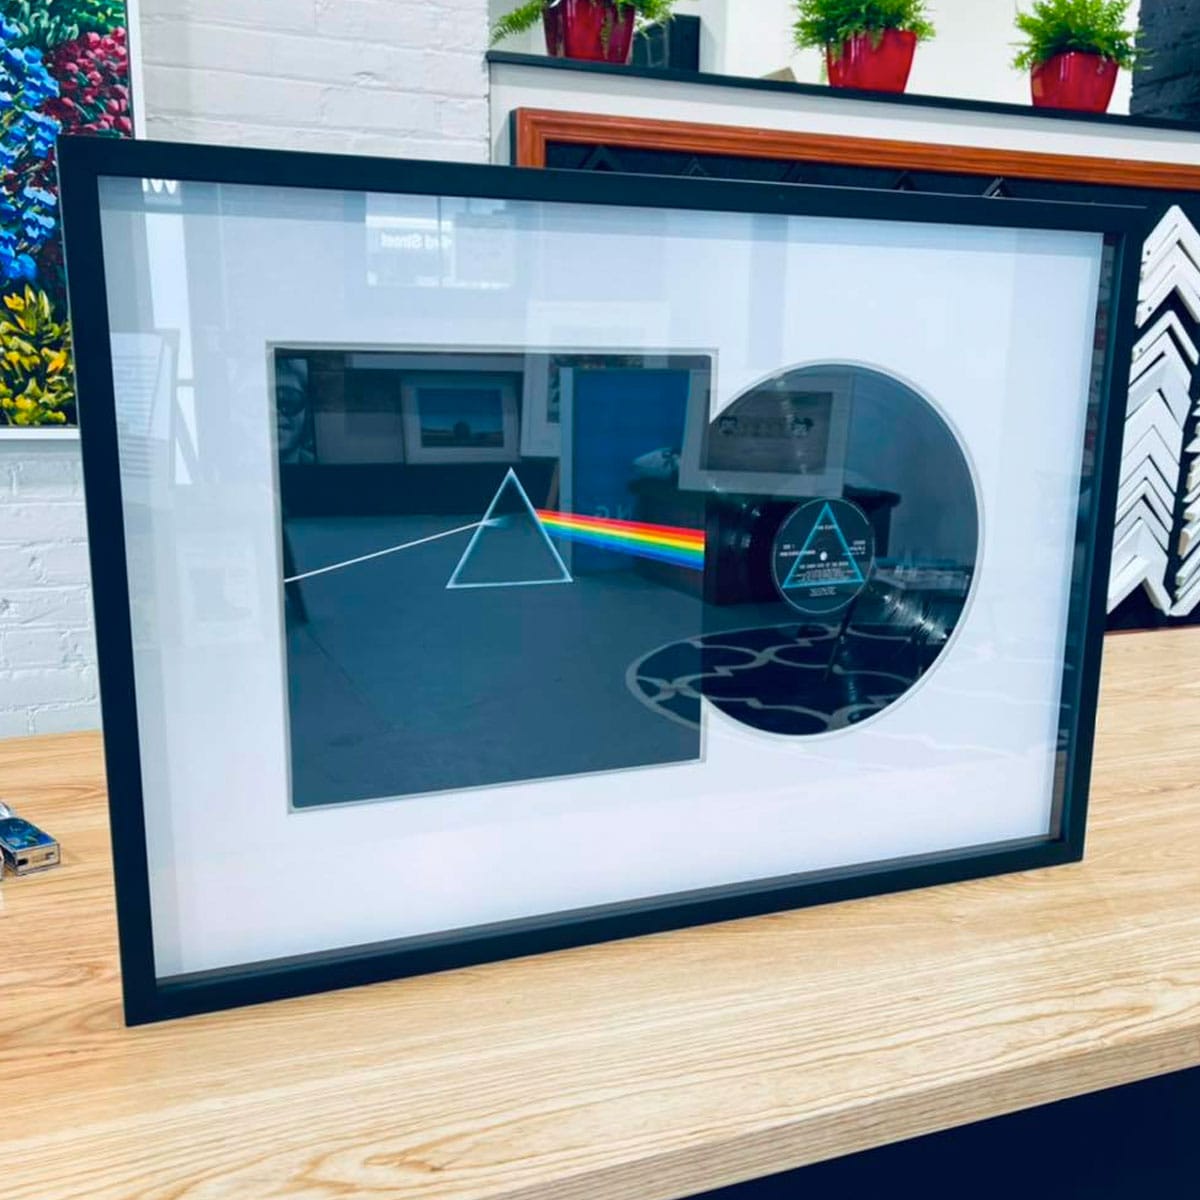 Framed Dark Side of the Moon record and album cover